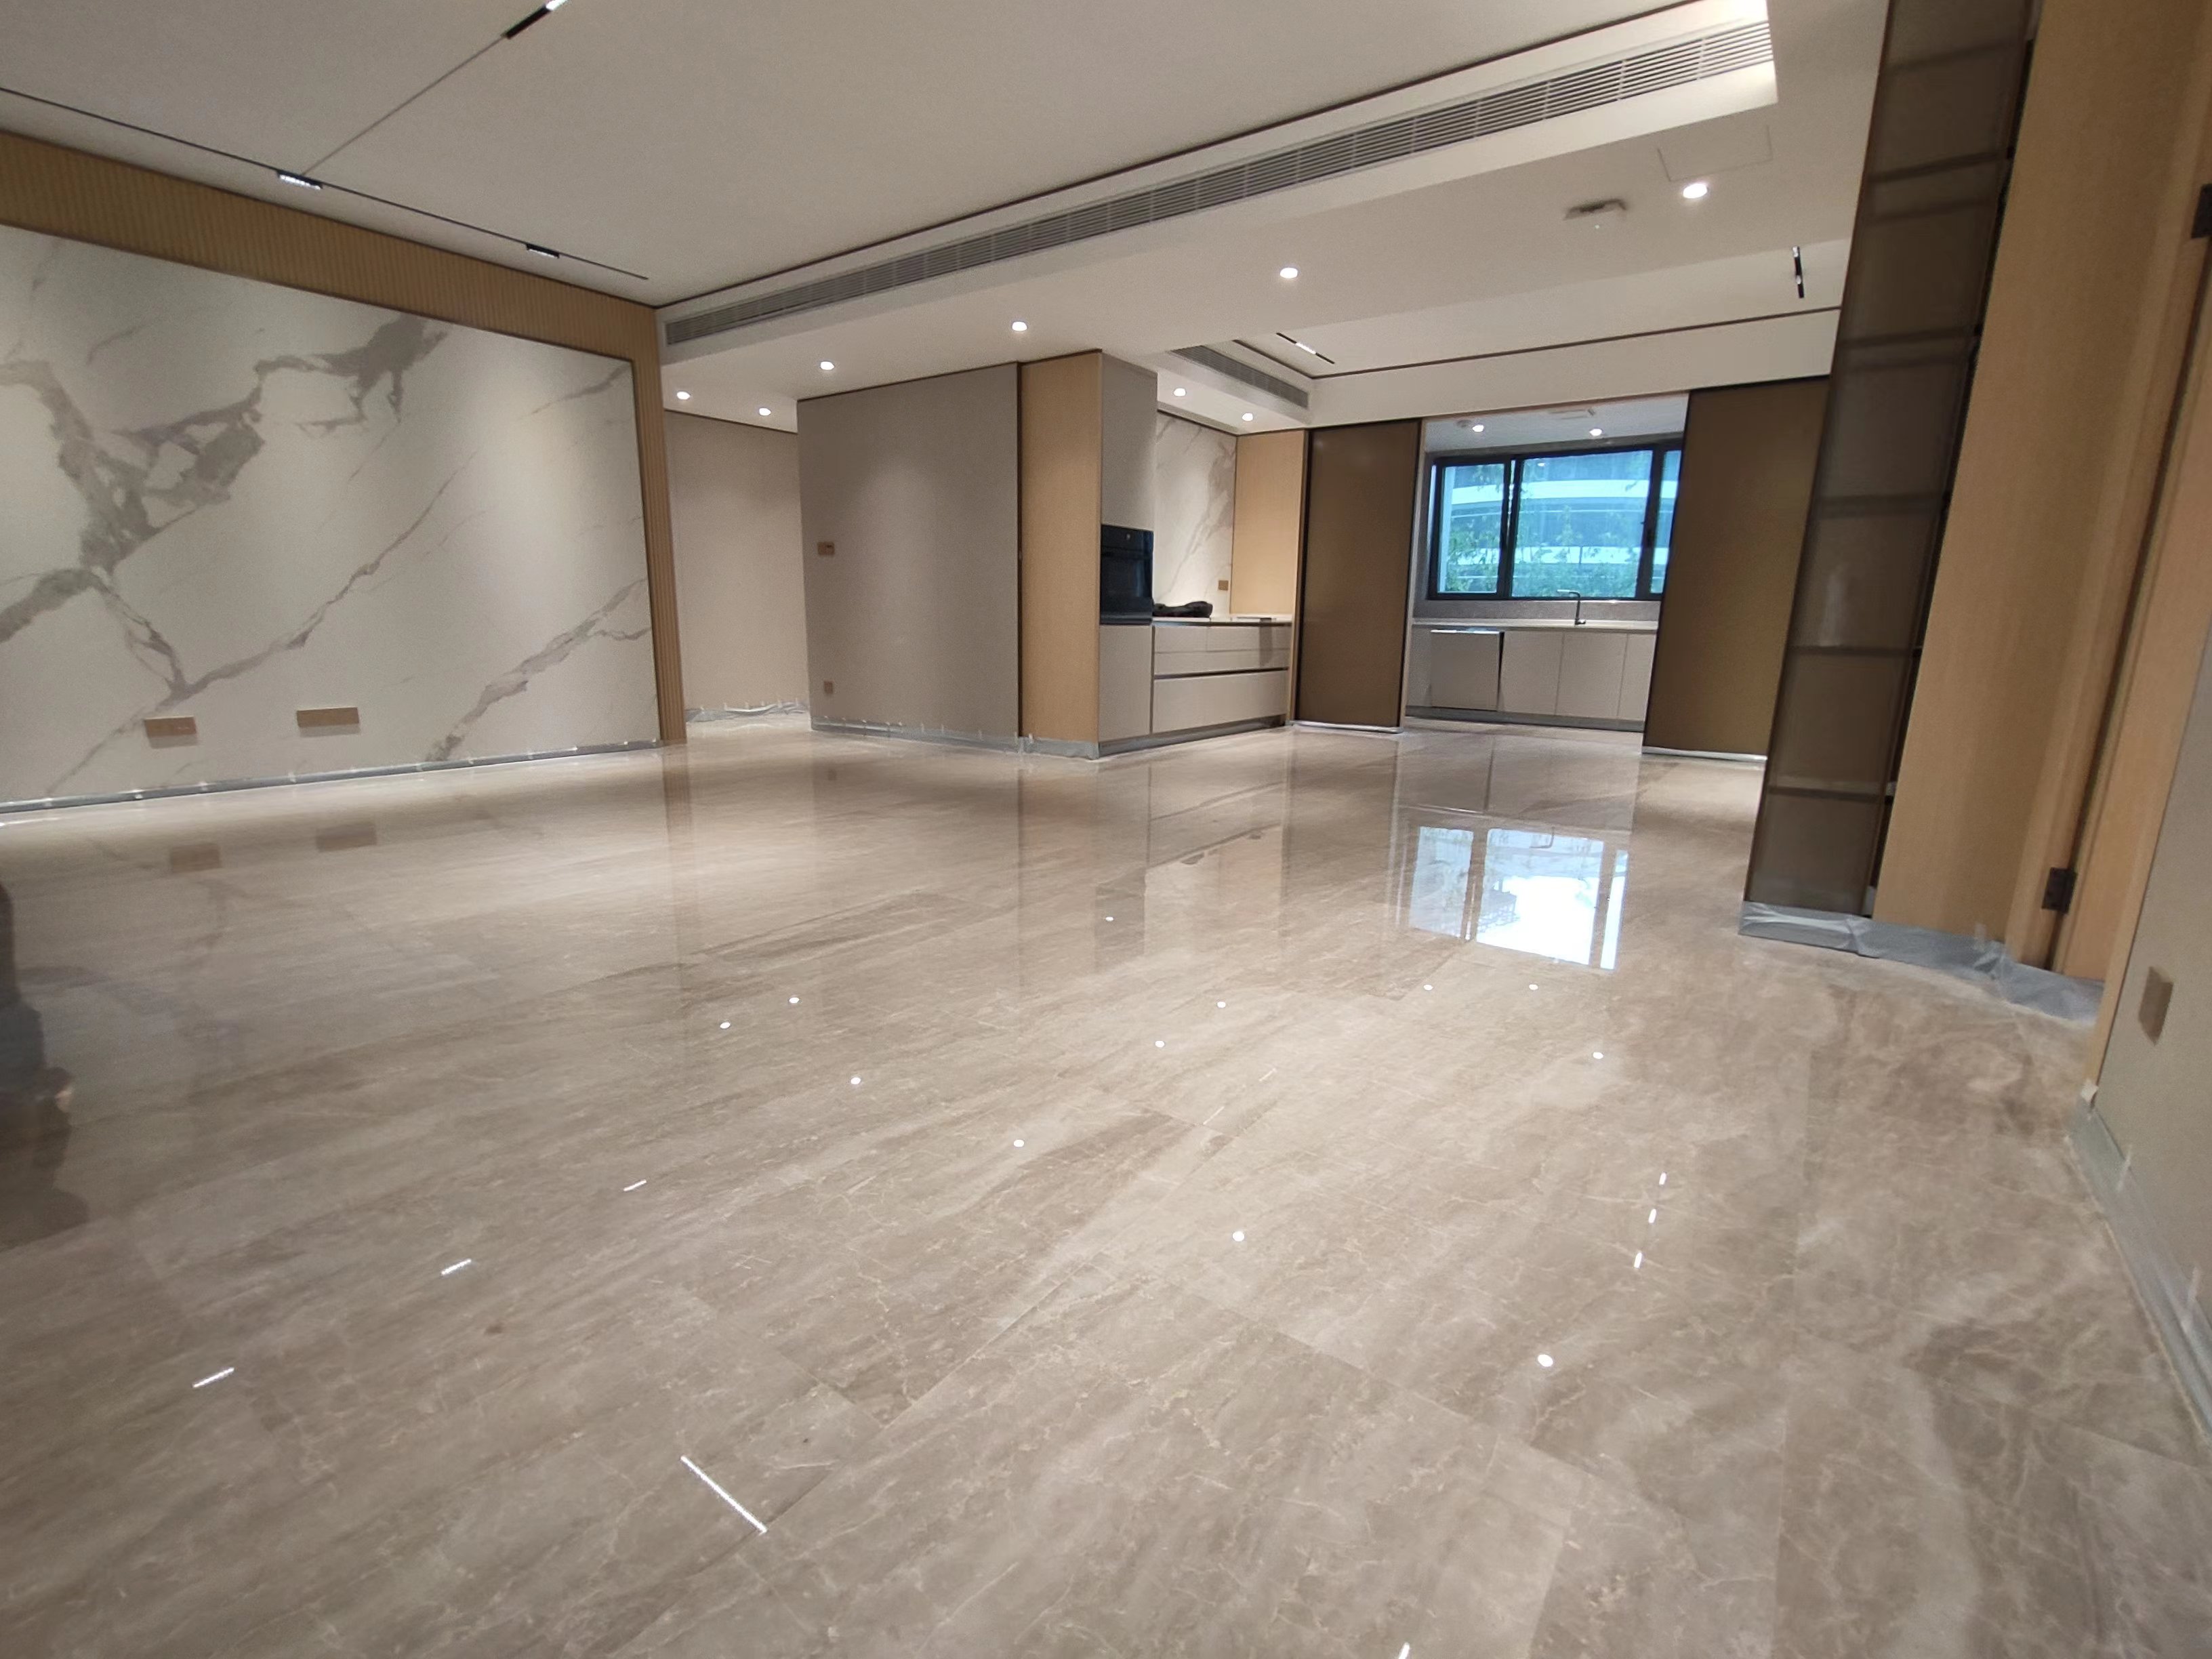 Large open space Brand-new High-end 3BR Riverside Apartment for Rent near Shanghai’s Lujiazui